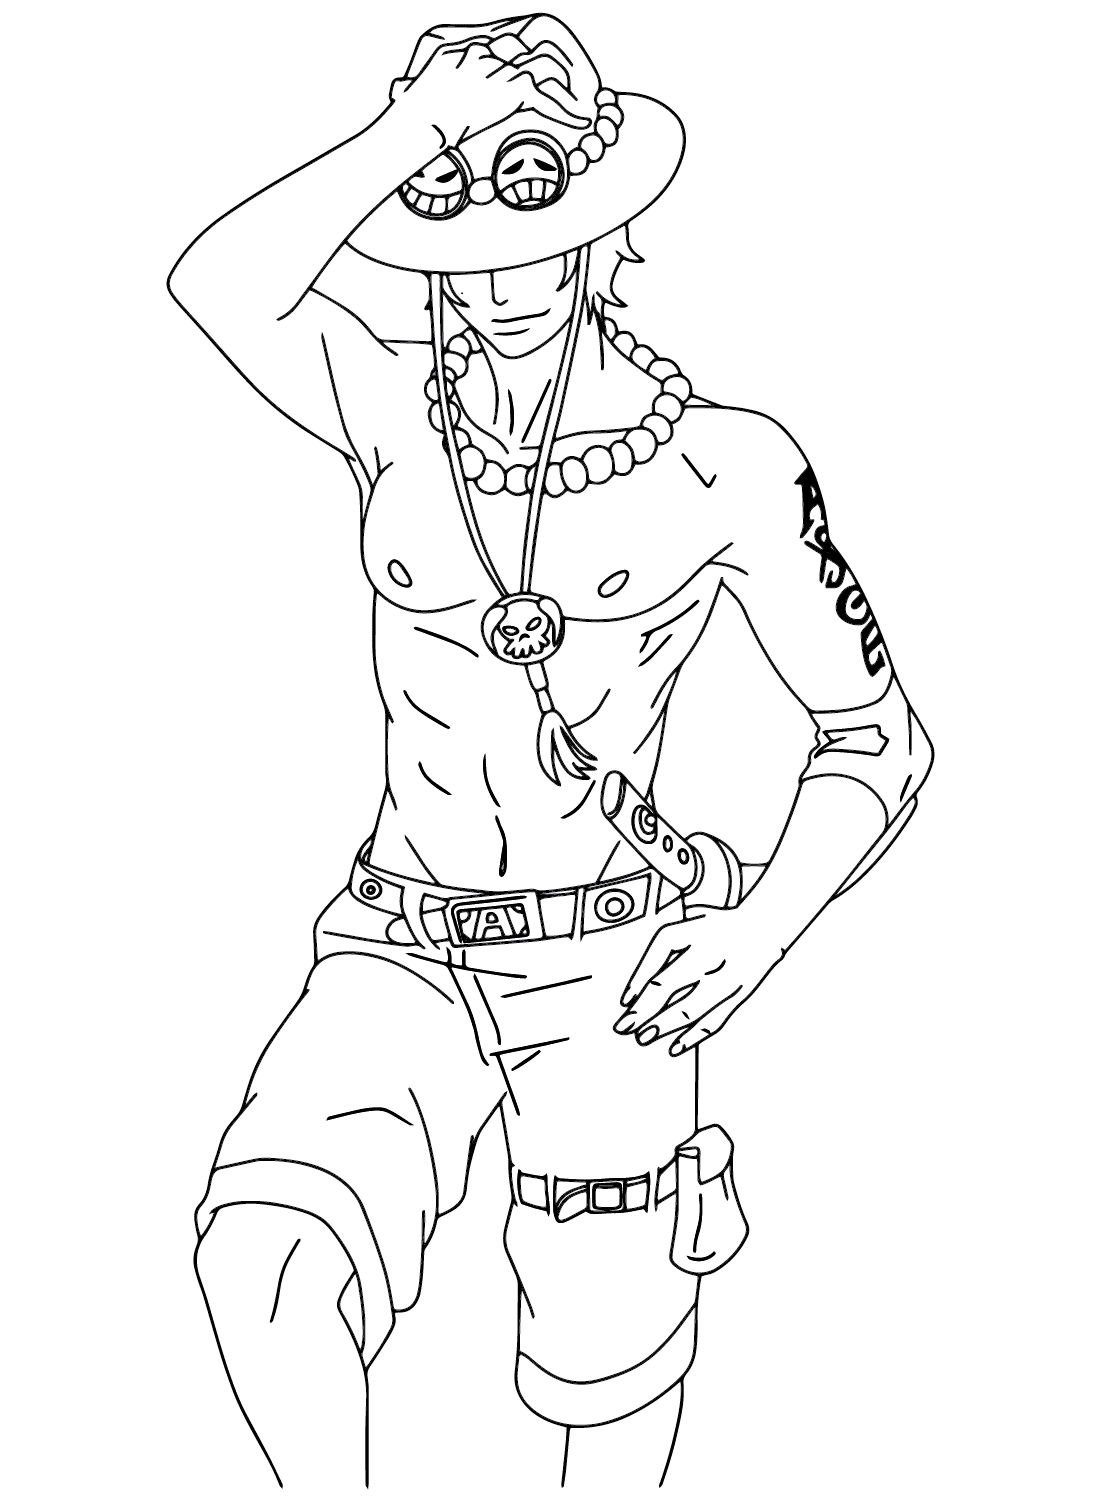 Portgas D. Ace Coloring Page PNG from Portgas D. Ace